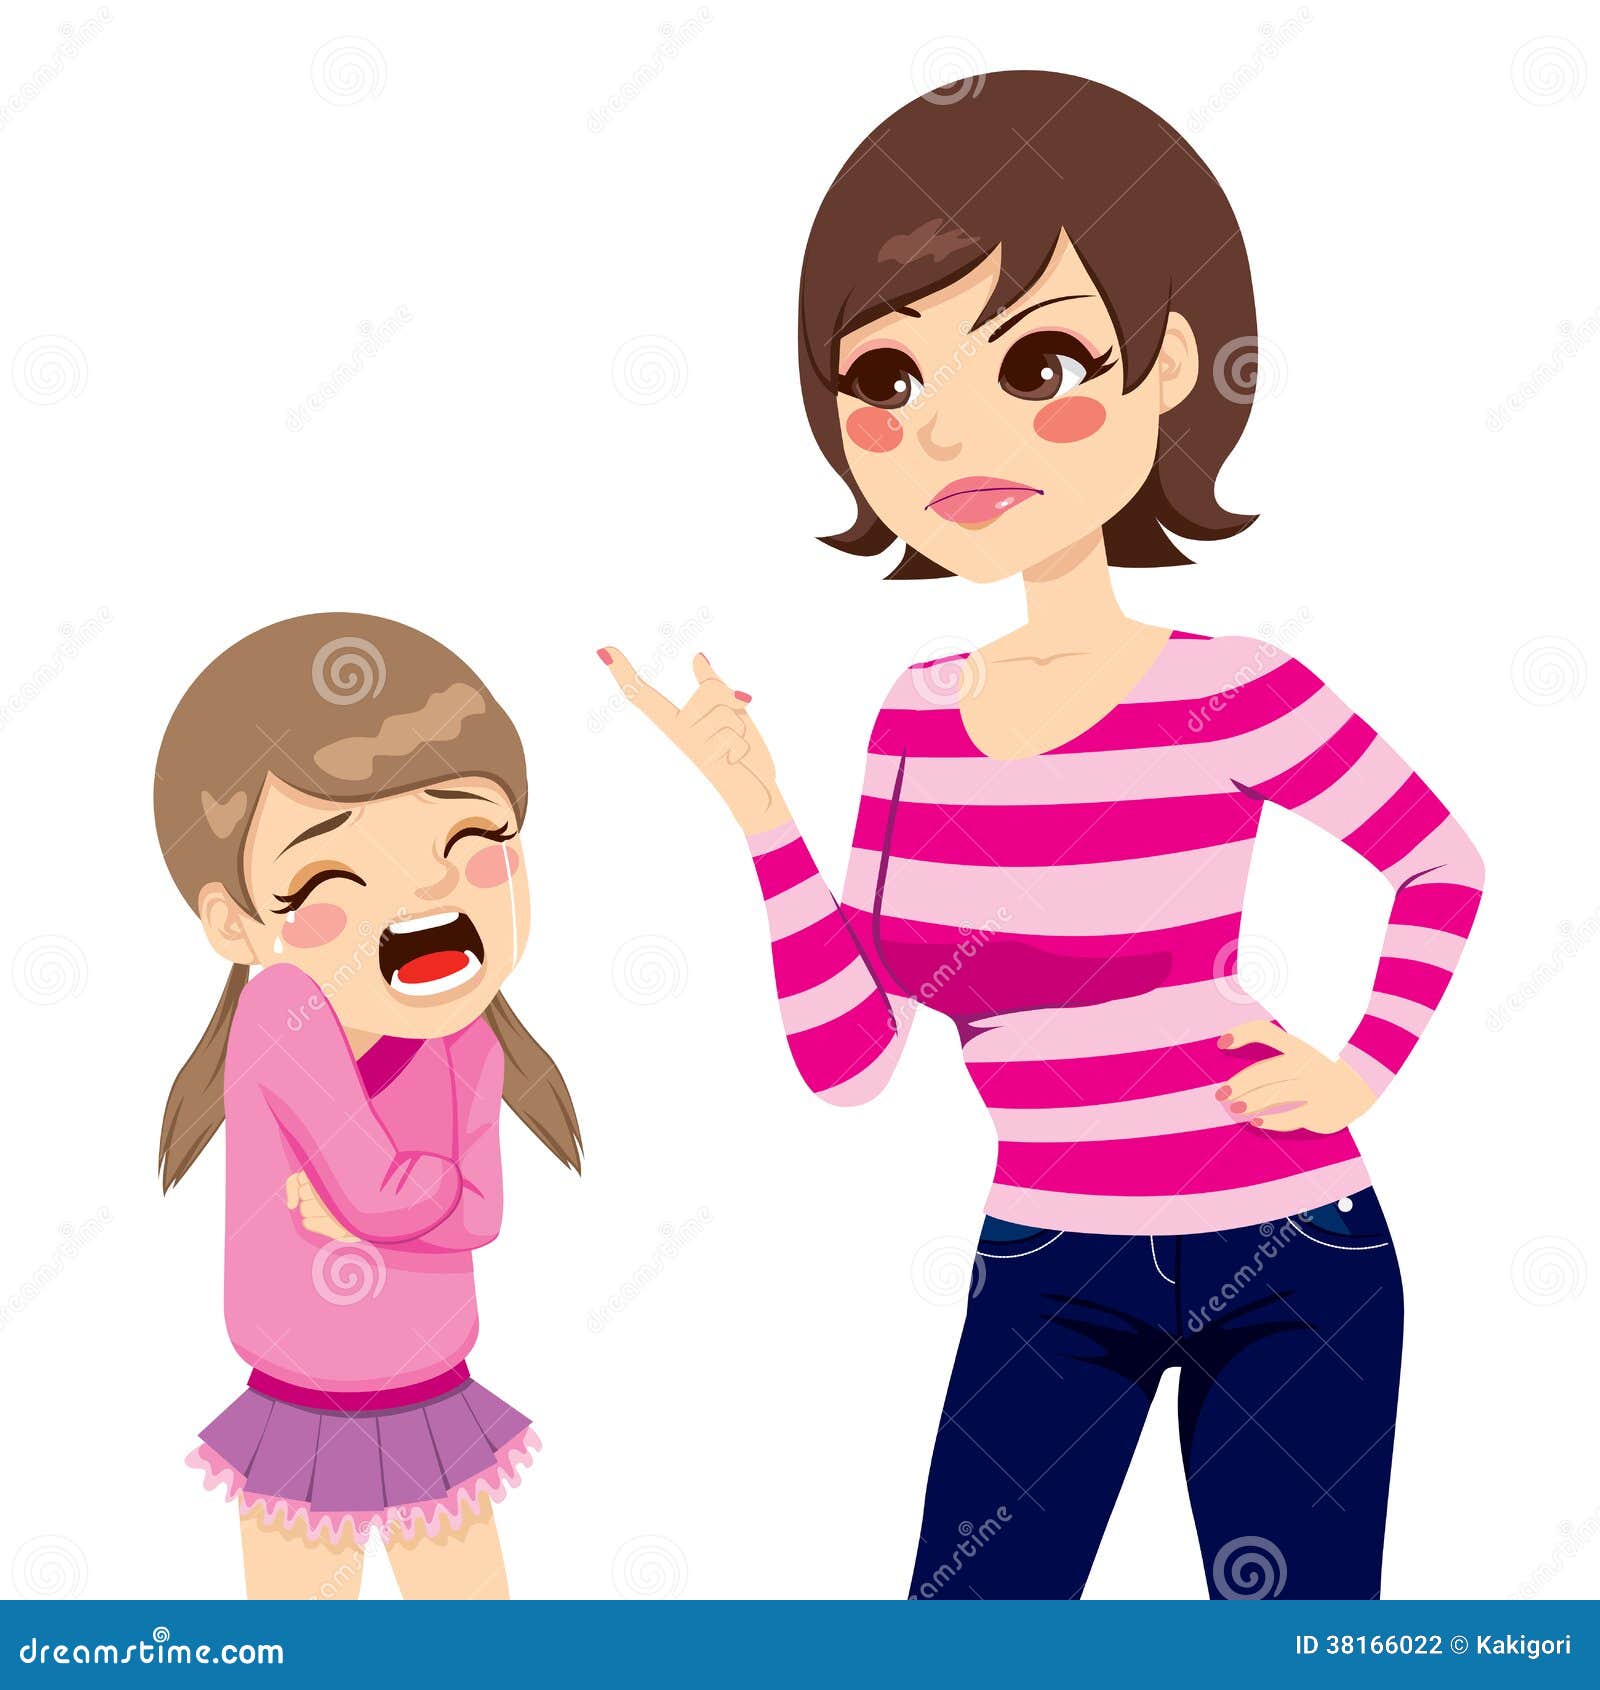 clipart of little girl crying - photo #33